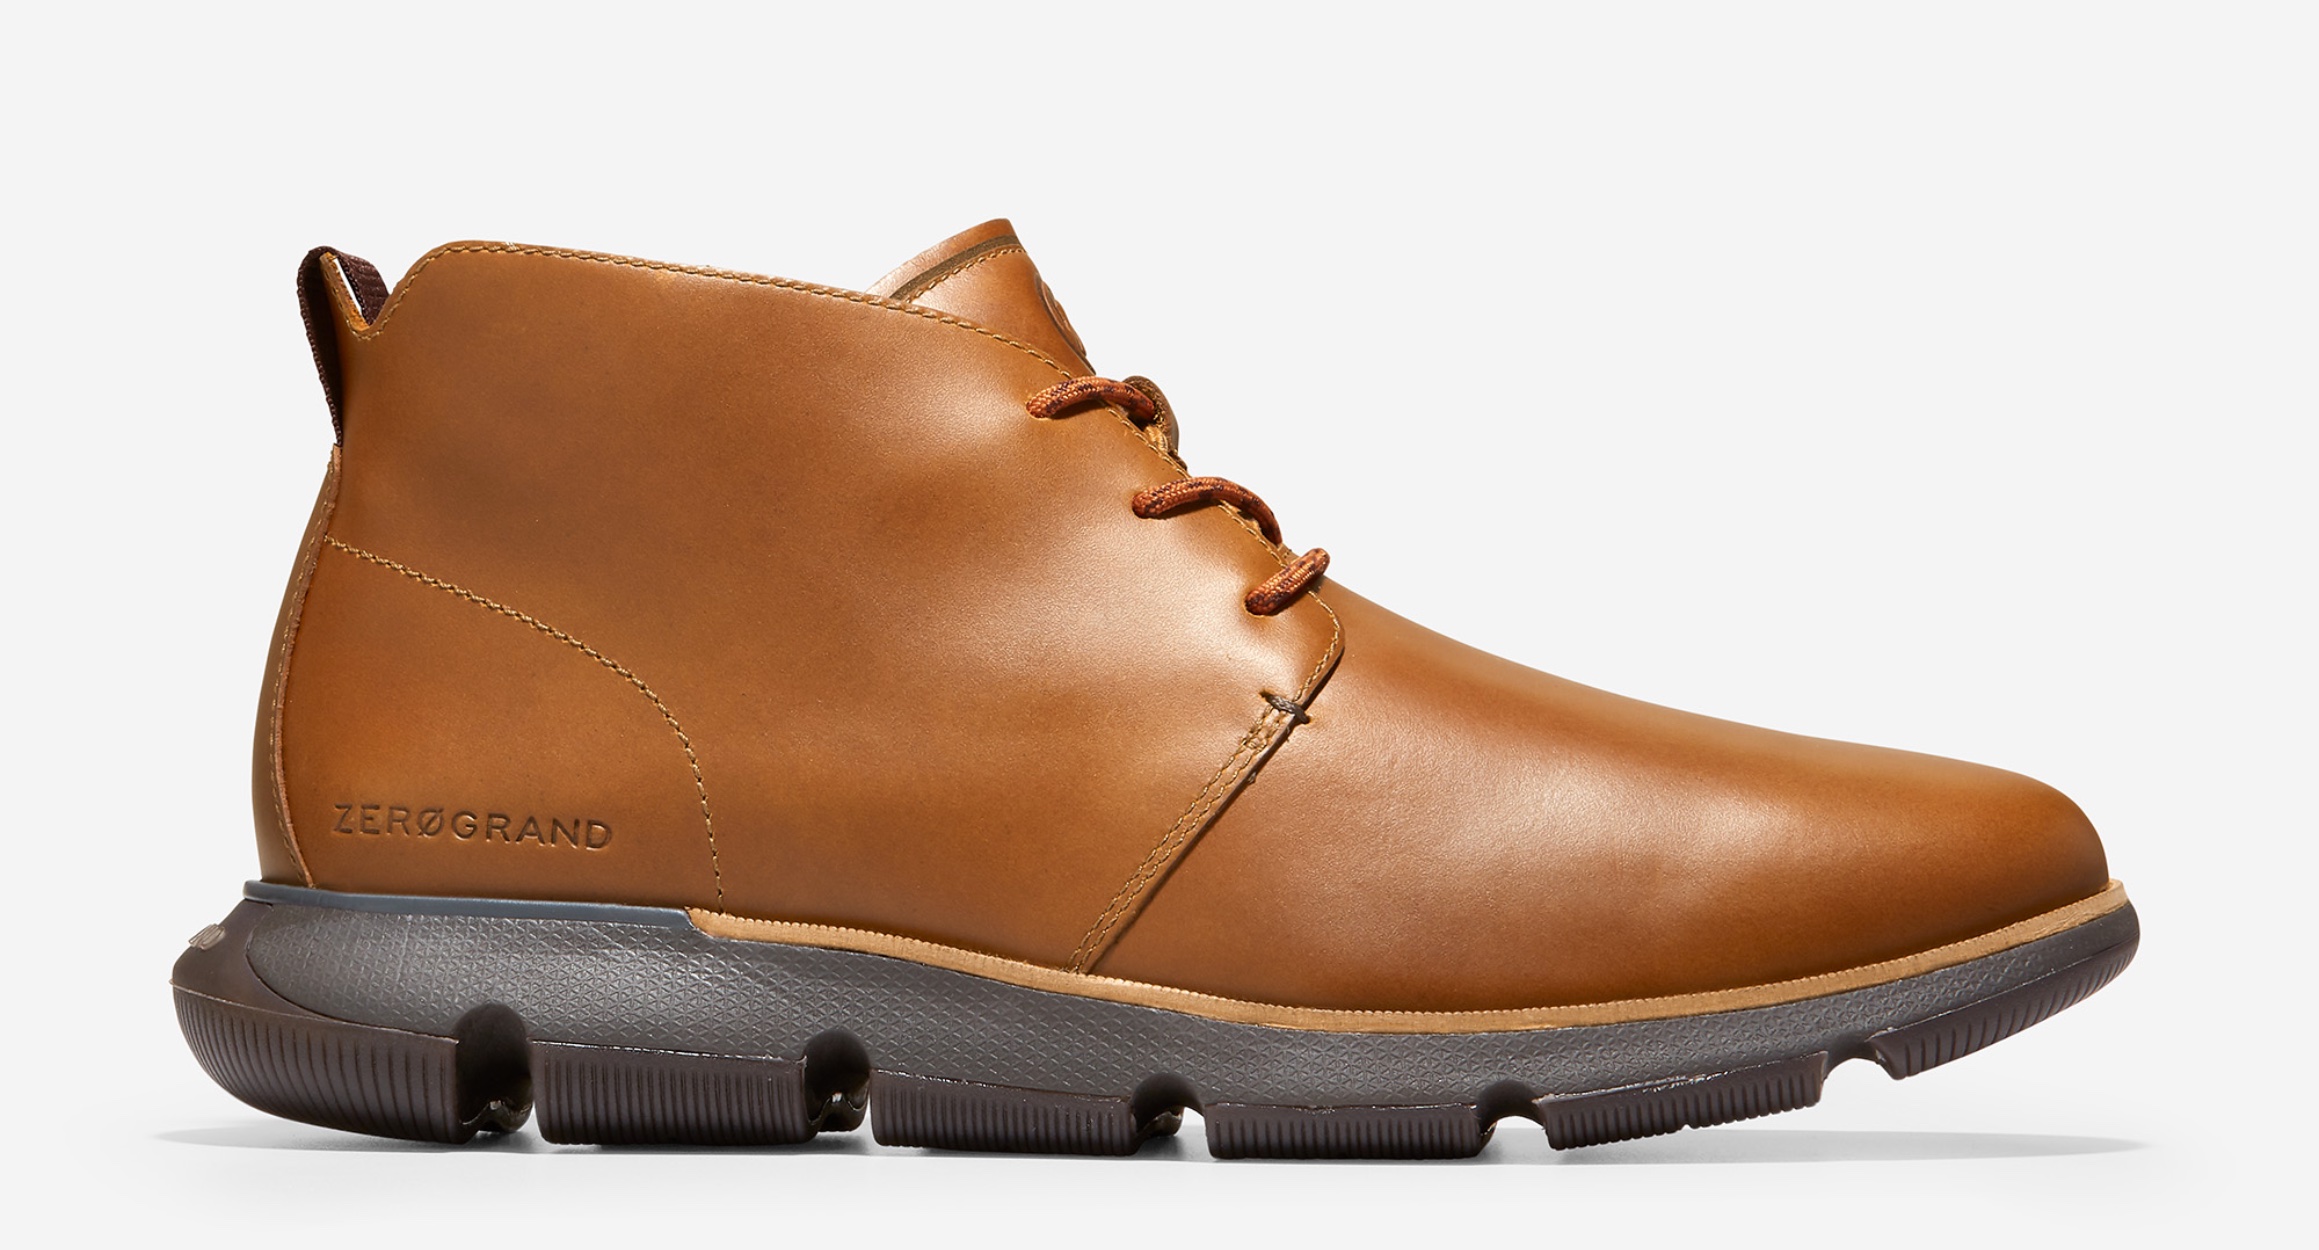 Cole Haan offers up to 50% off new markdowns with deals from $10 